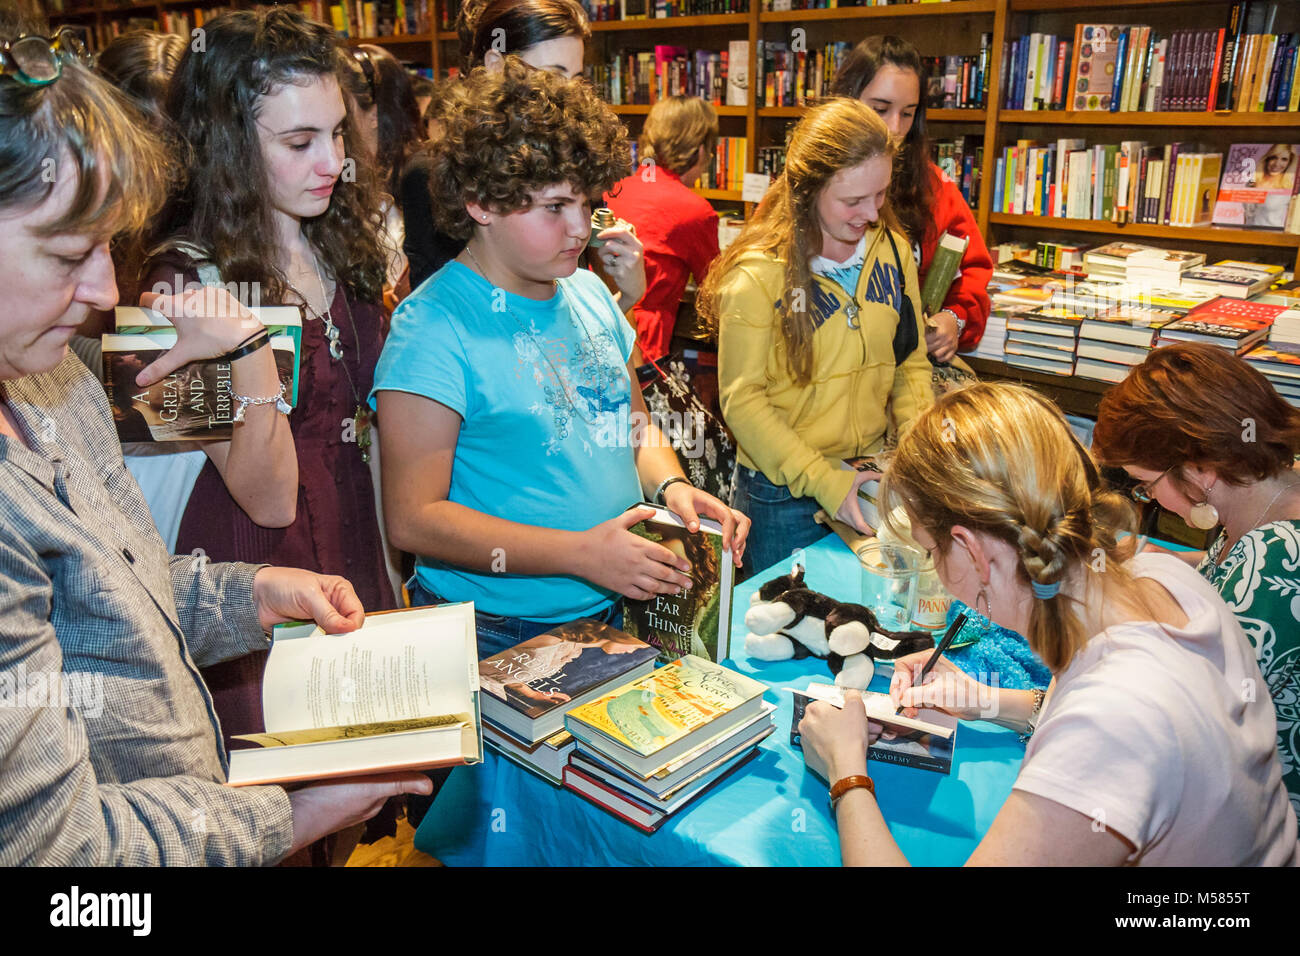 Miami Florida,Coral Gables,Books & Books,Meet the Authors,Libba Bray,Shannon Hale,young adult fiction authors,literature,teen teens teenager teenagers Stock Photo